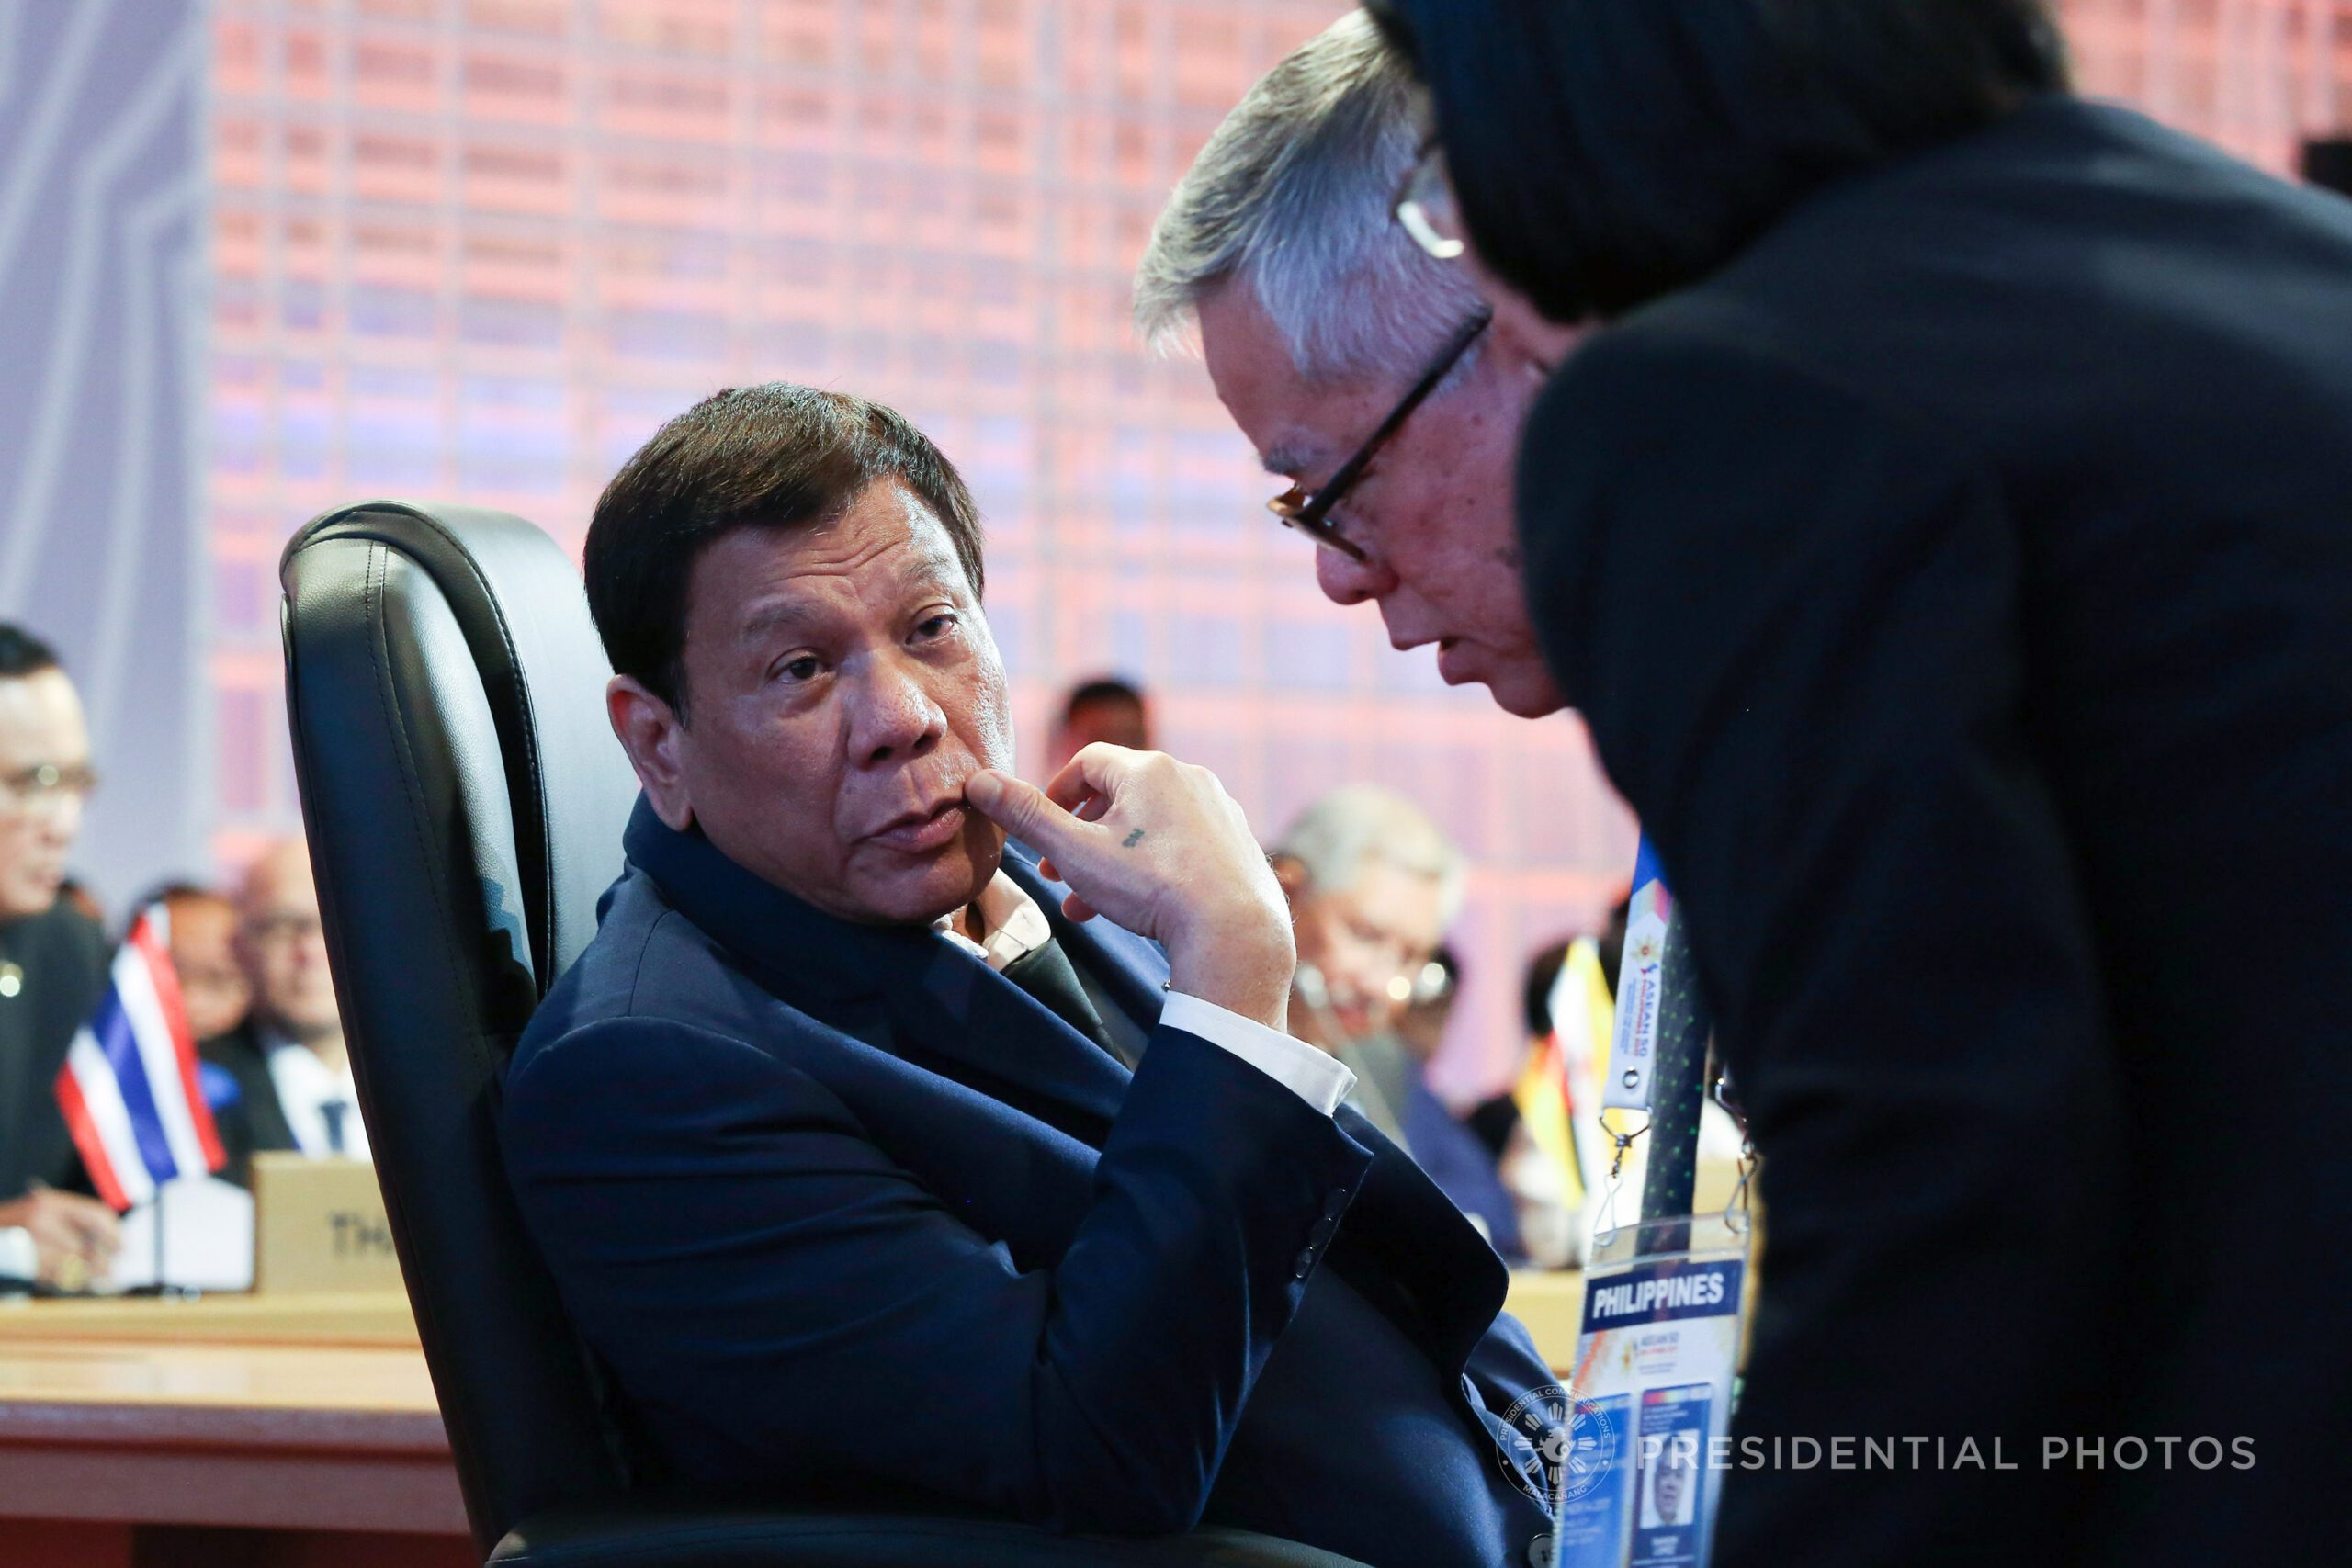 Duterte’s ASEAN chairmanship was a win for him and China